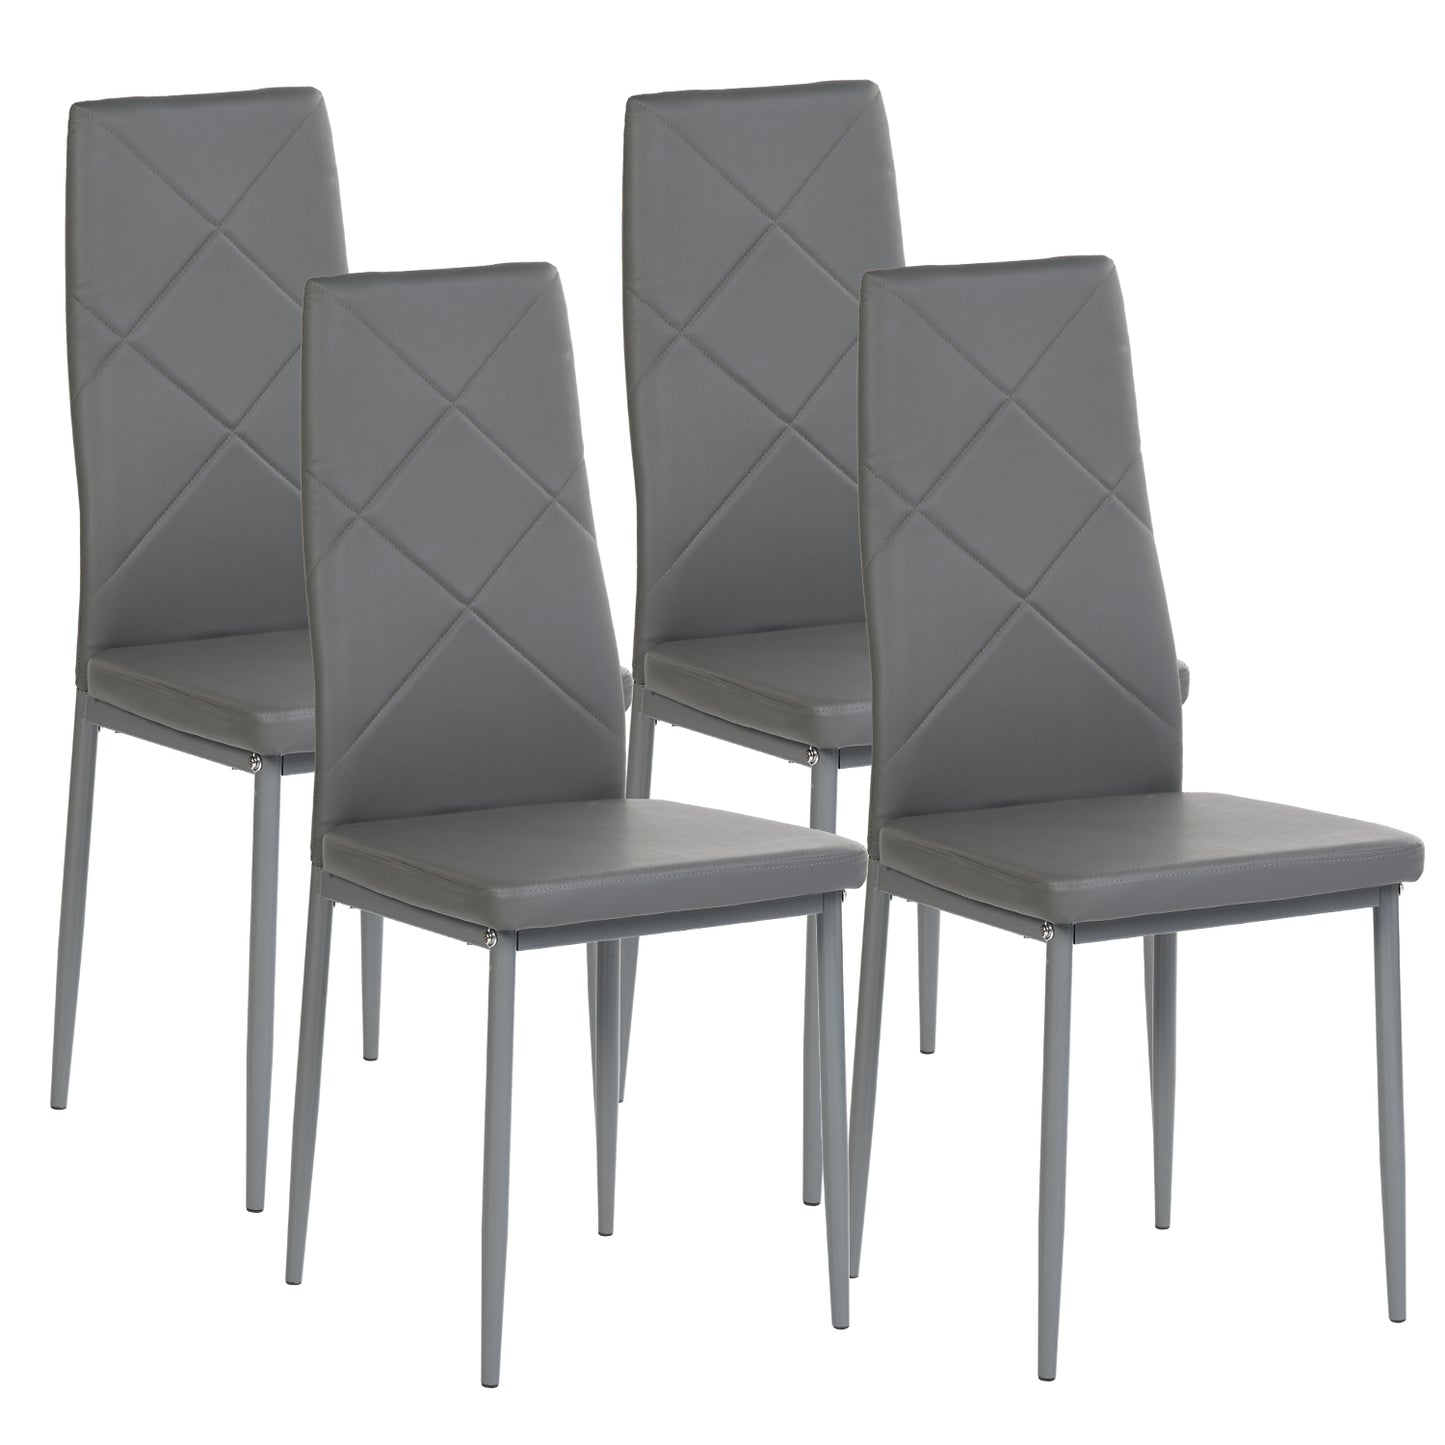 ANN-DIAMOND Upholstered Side Chairs (Set of 4)